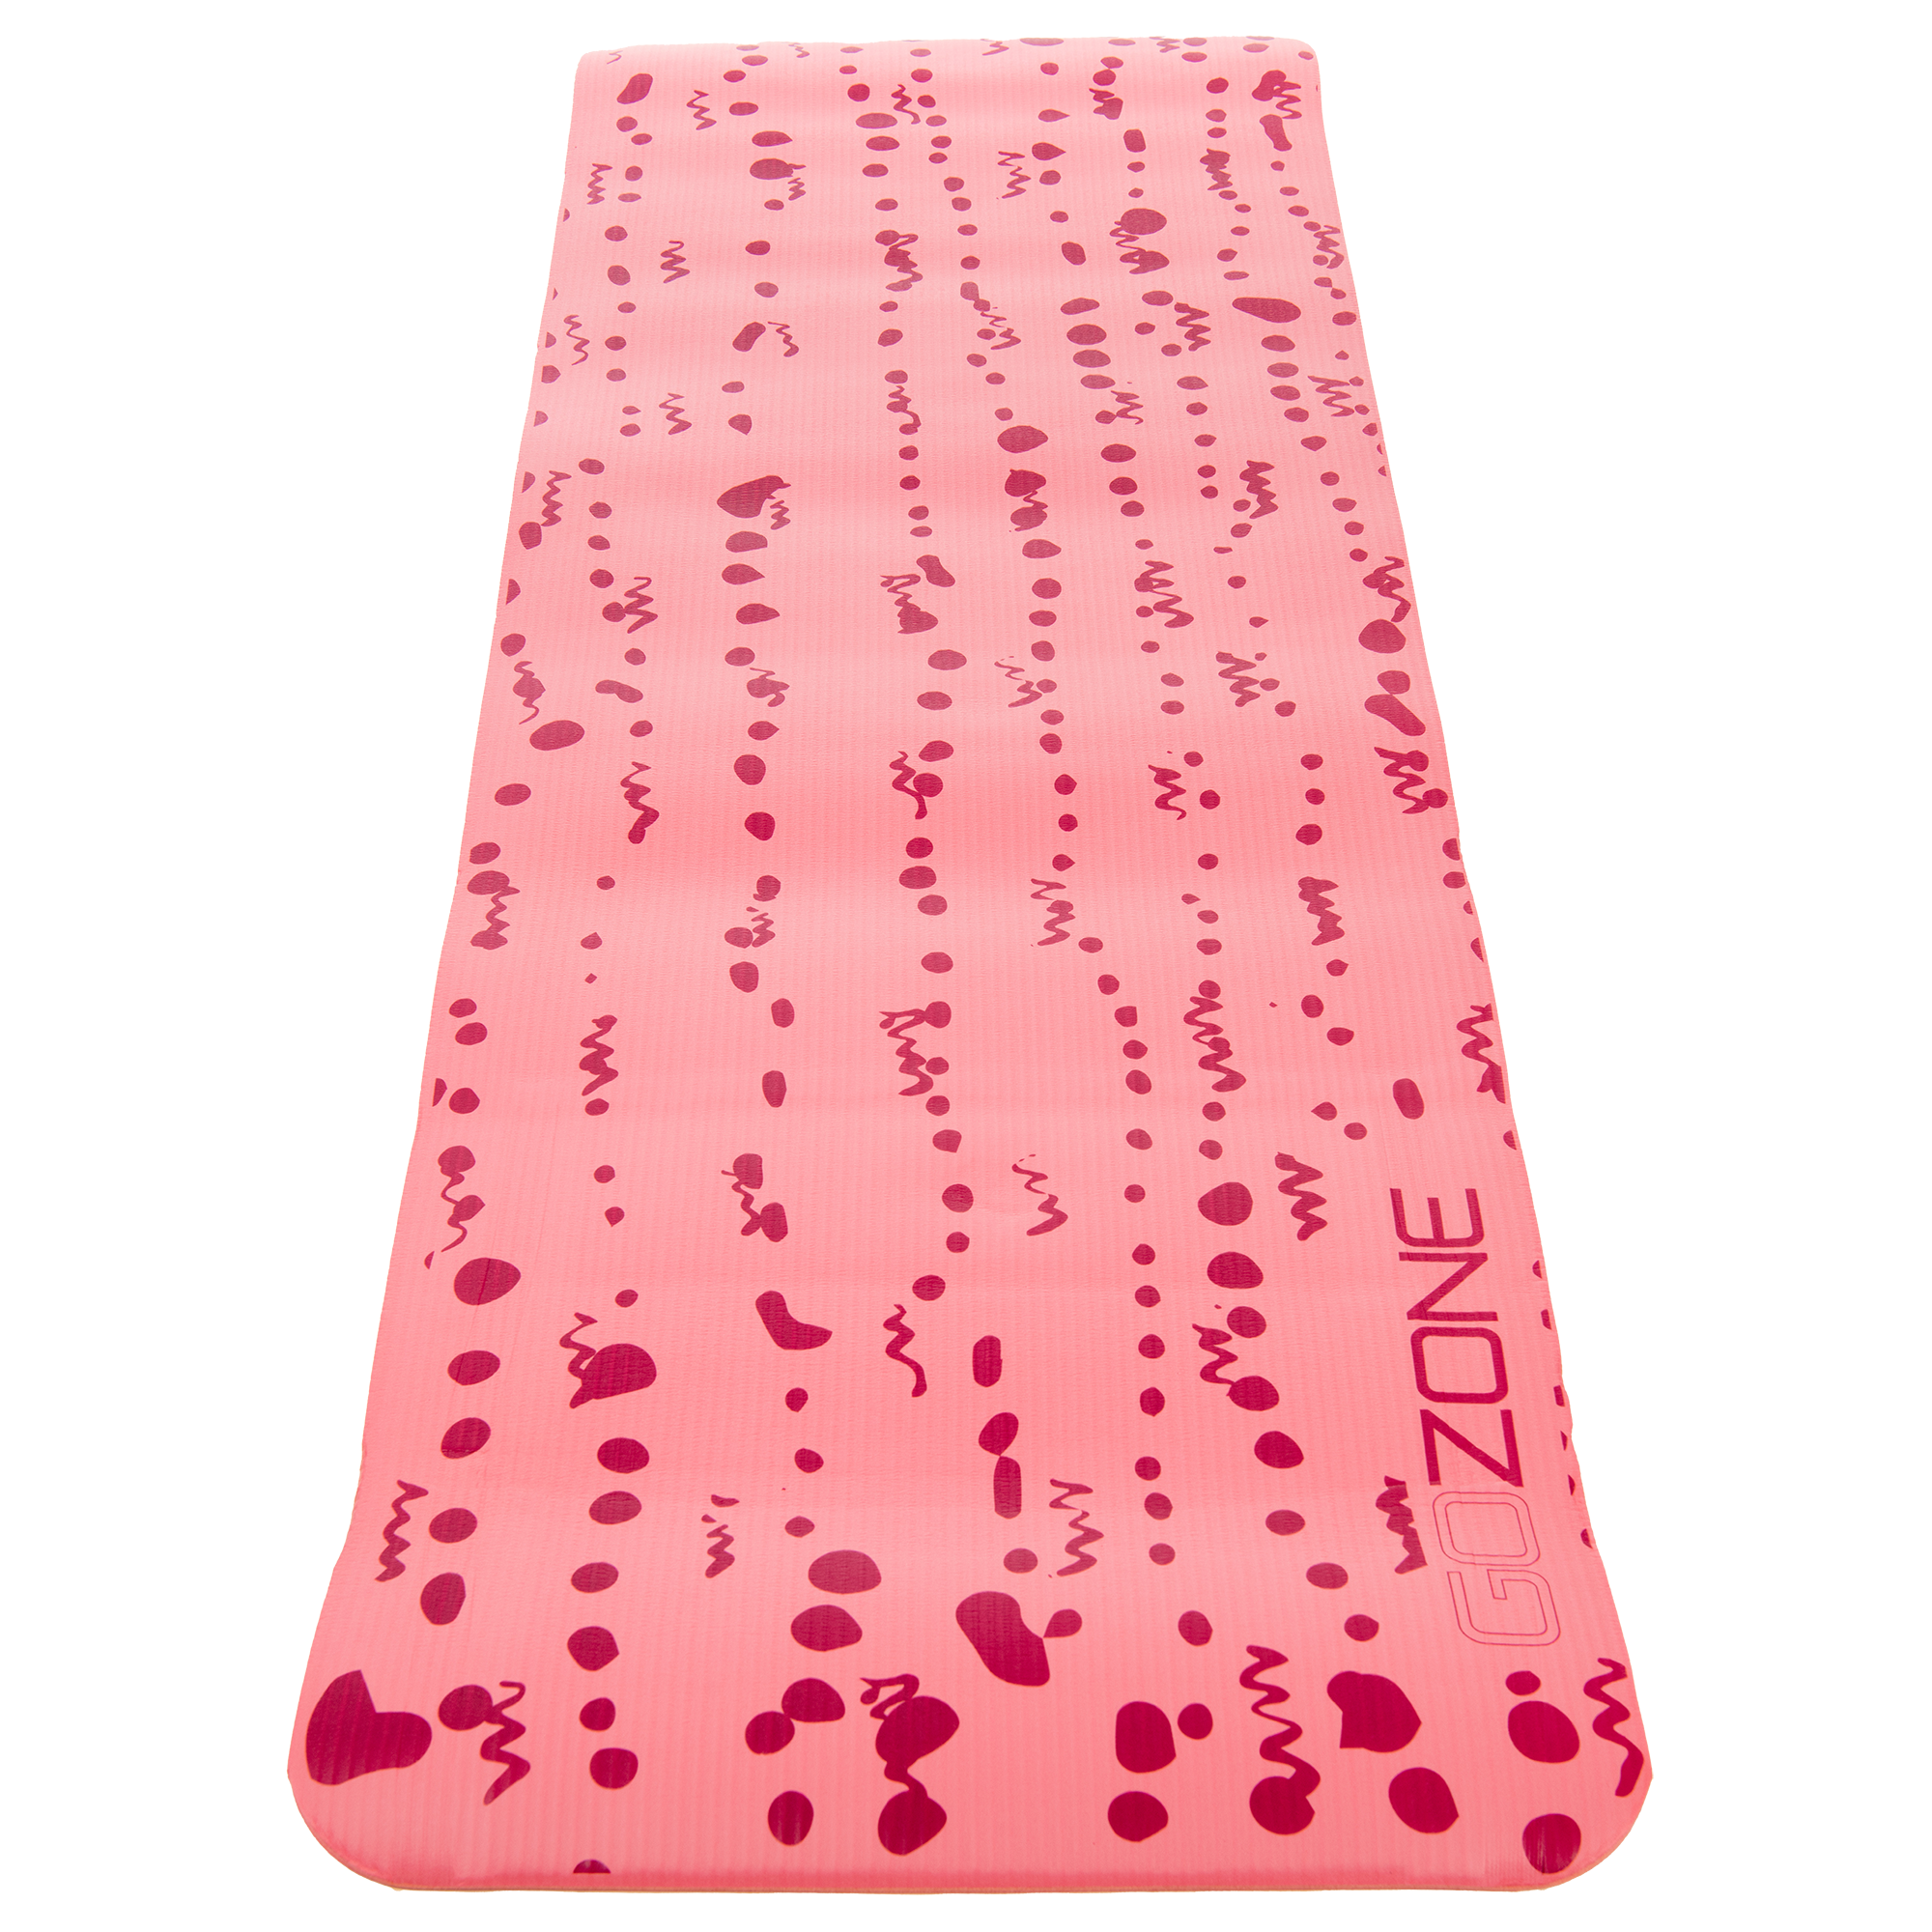 BOLDFIT NBR Yoga Mat For Women & Men-10mm Thick Non Slip Exercise mat For  Home-Gym Workout Pink 10 mm Yoga Mat - Buy BOLDFIT NBR Yoga Mat For Women &  Men-10mm Thick